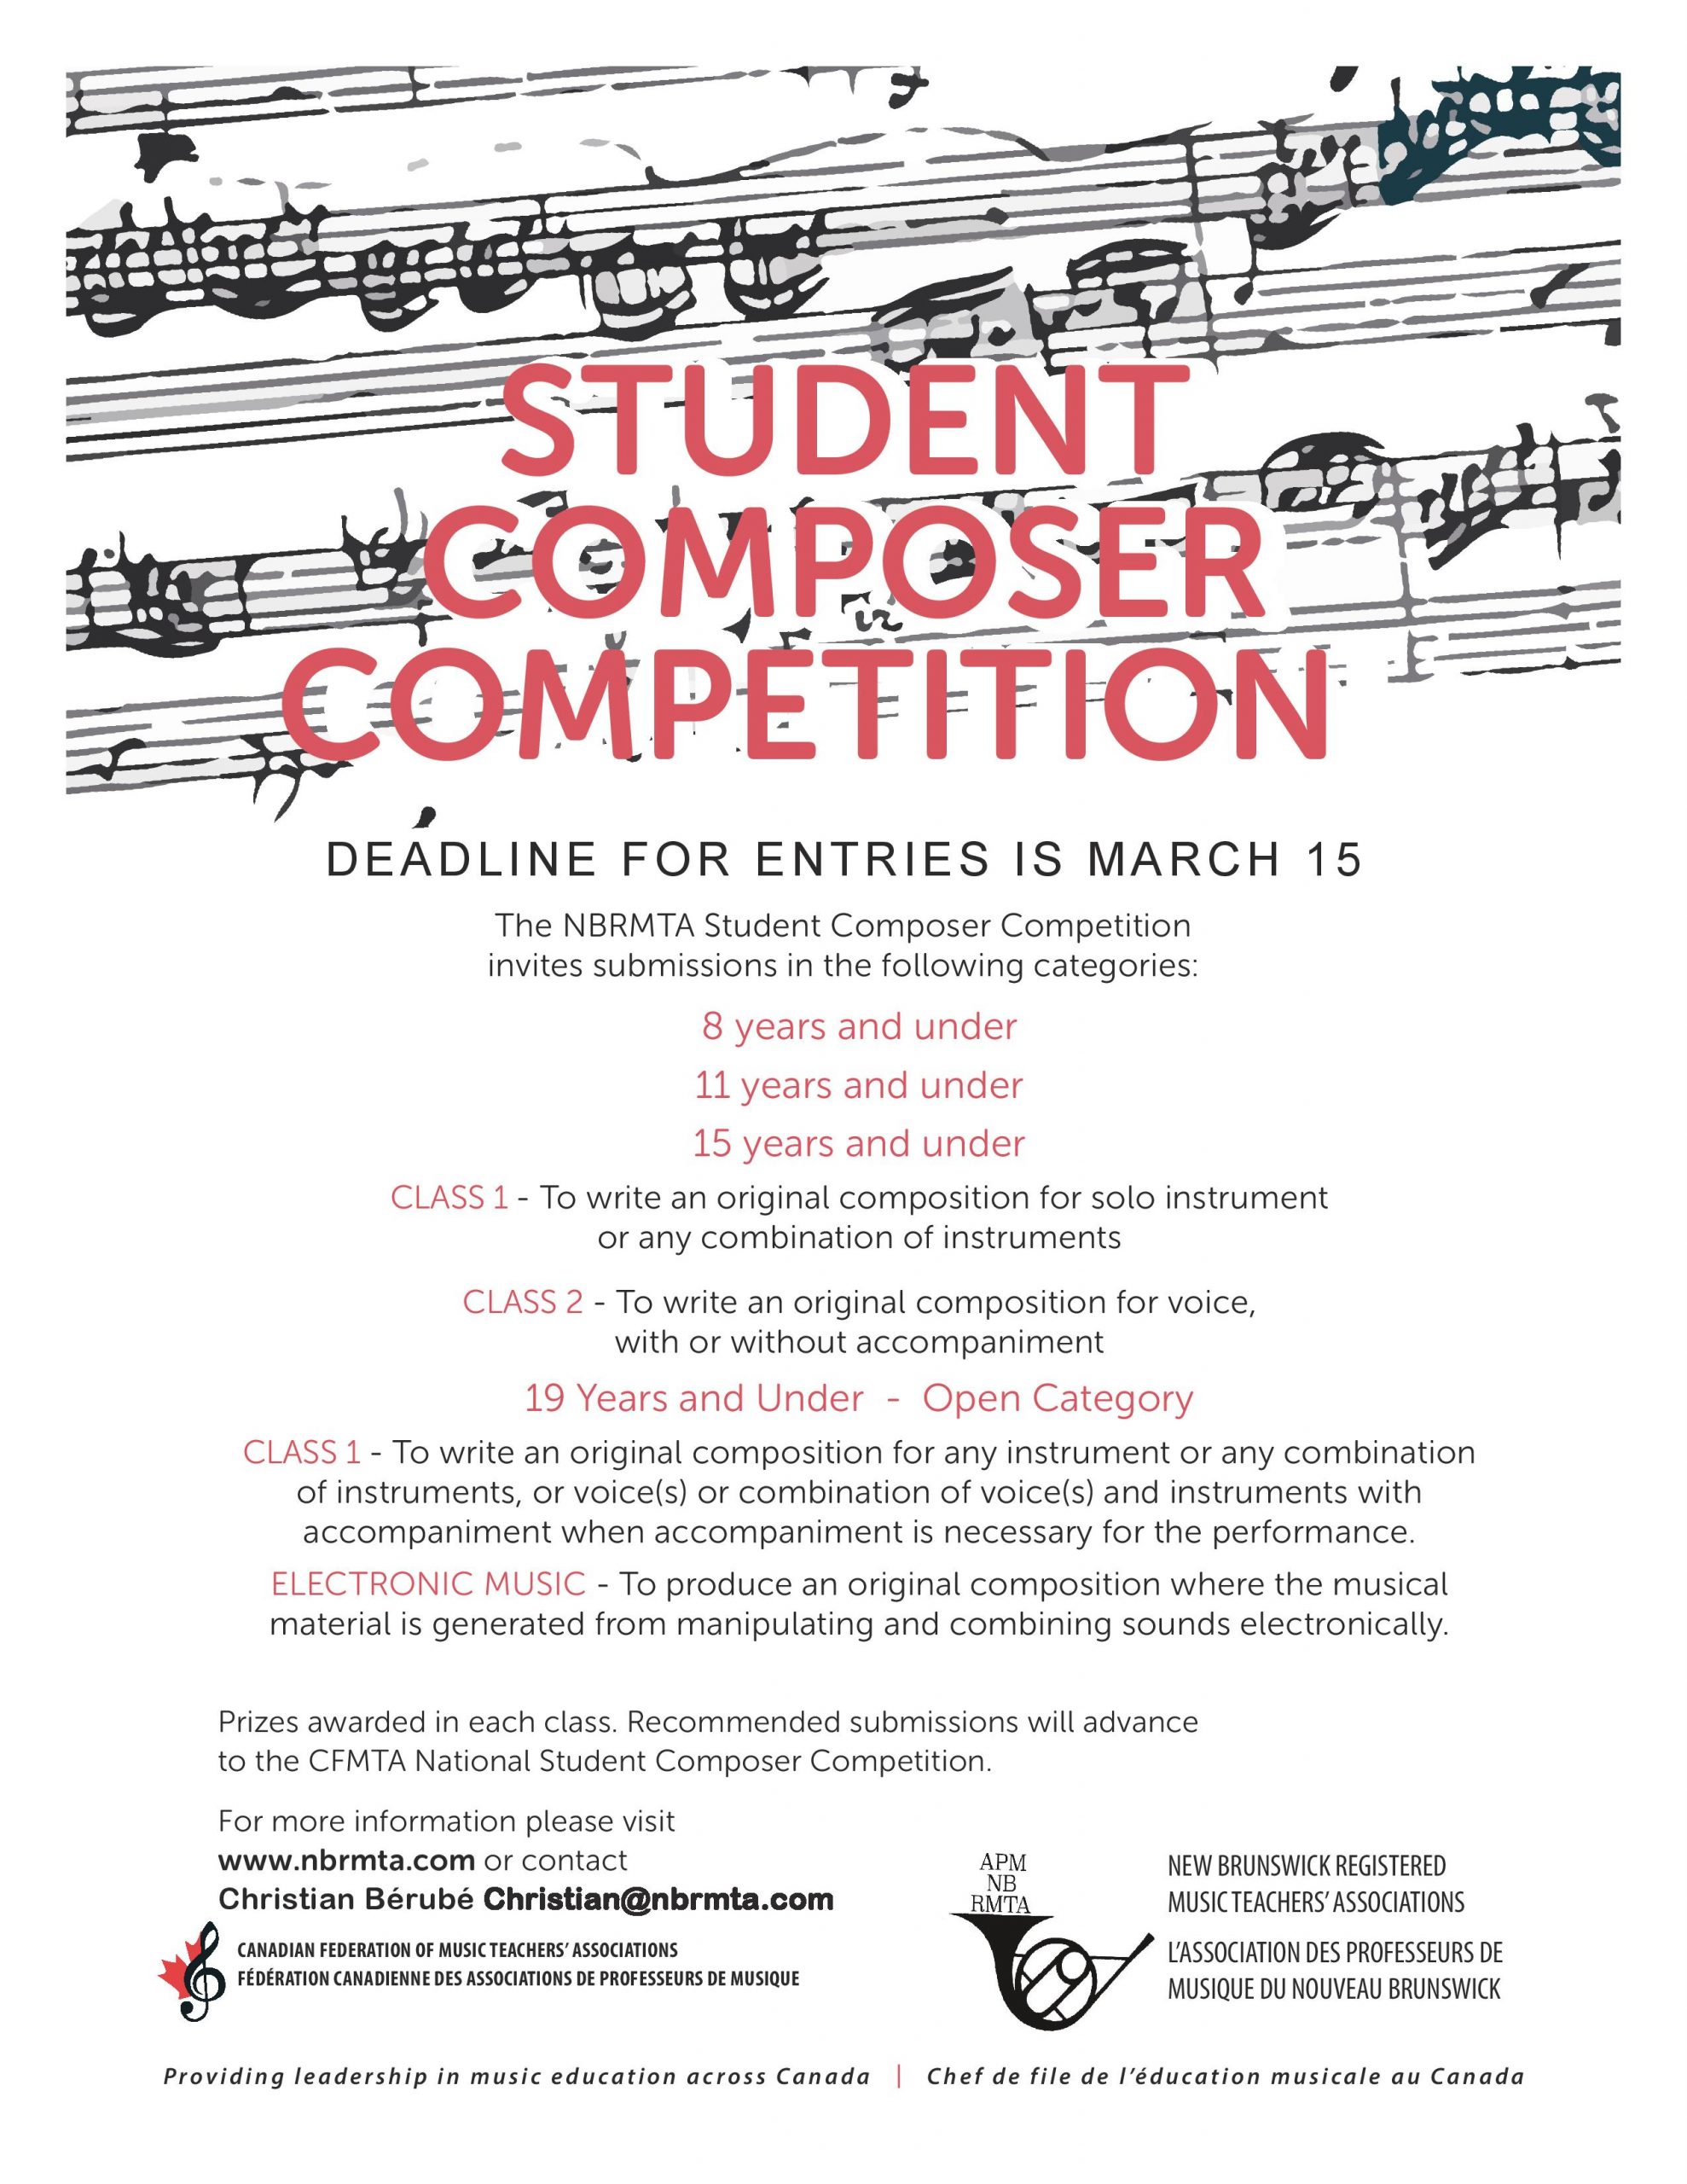 NBRMTA Student Composer Competition – New Brunswick Registered Music ...